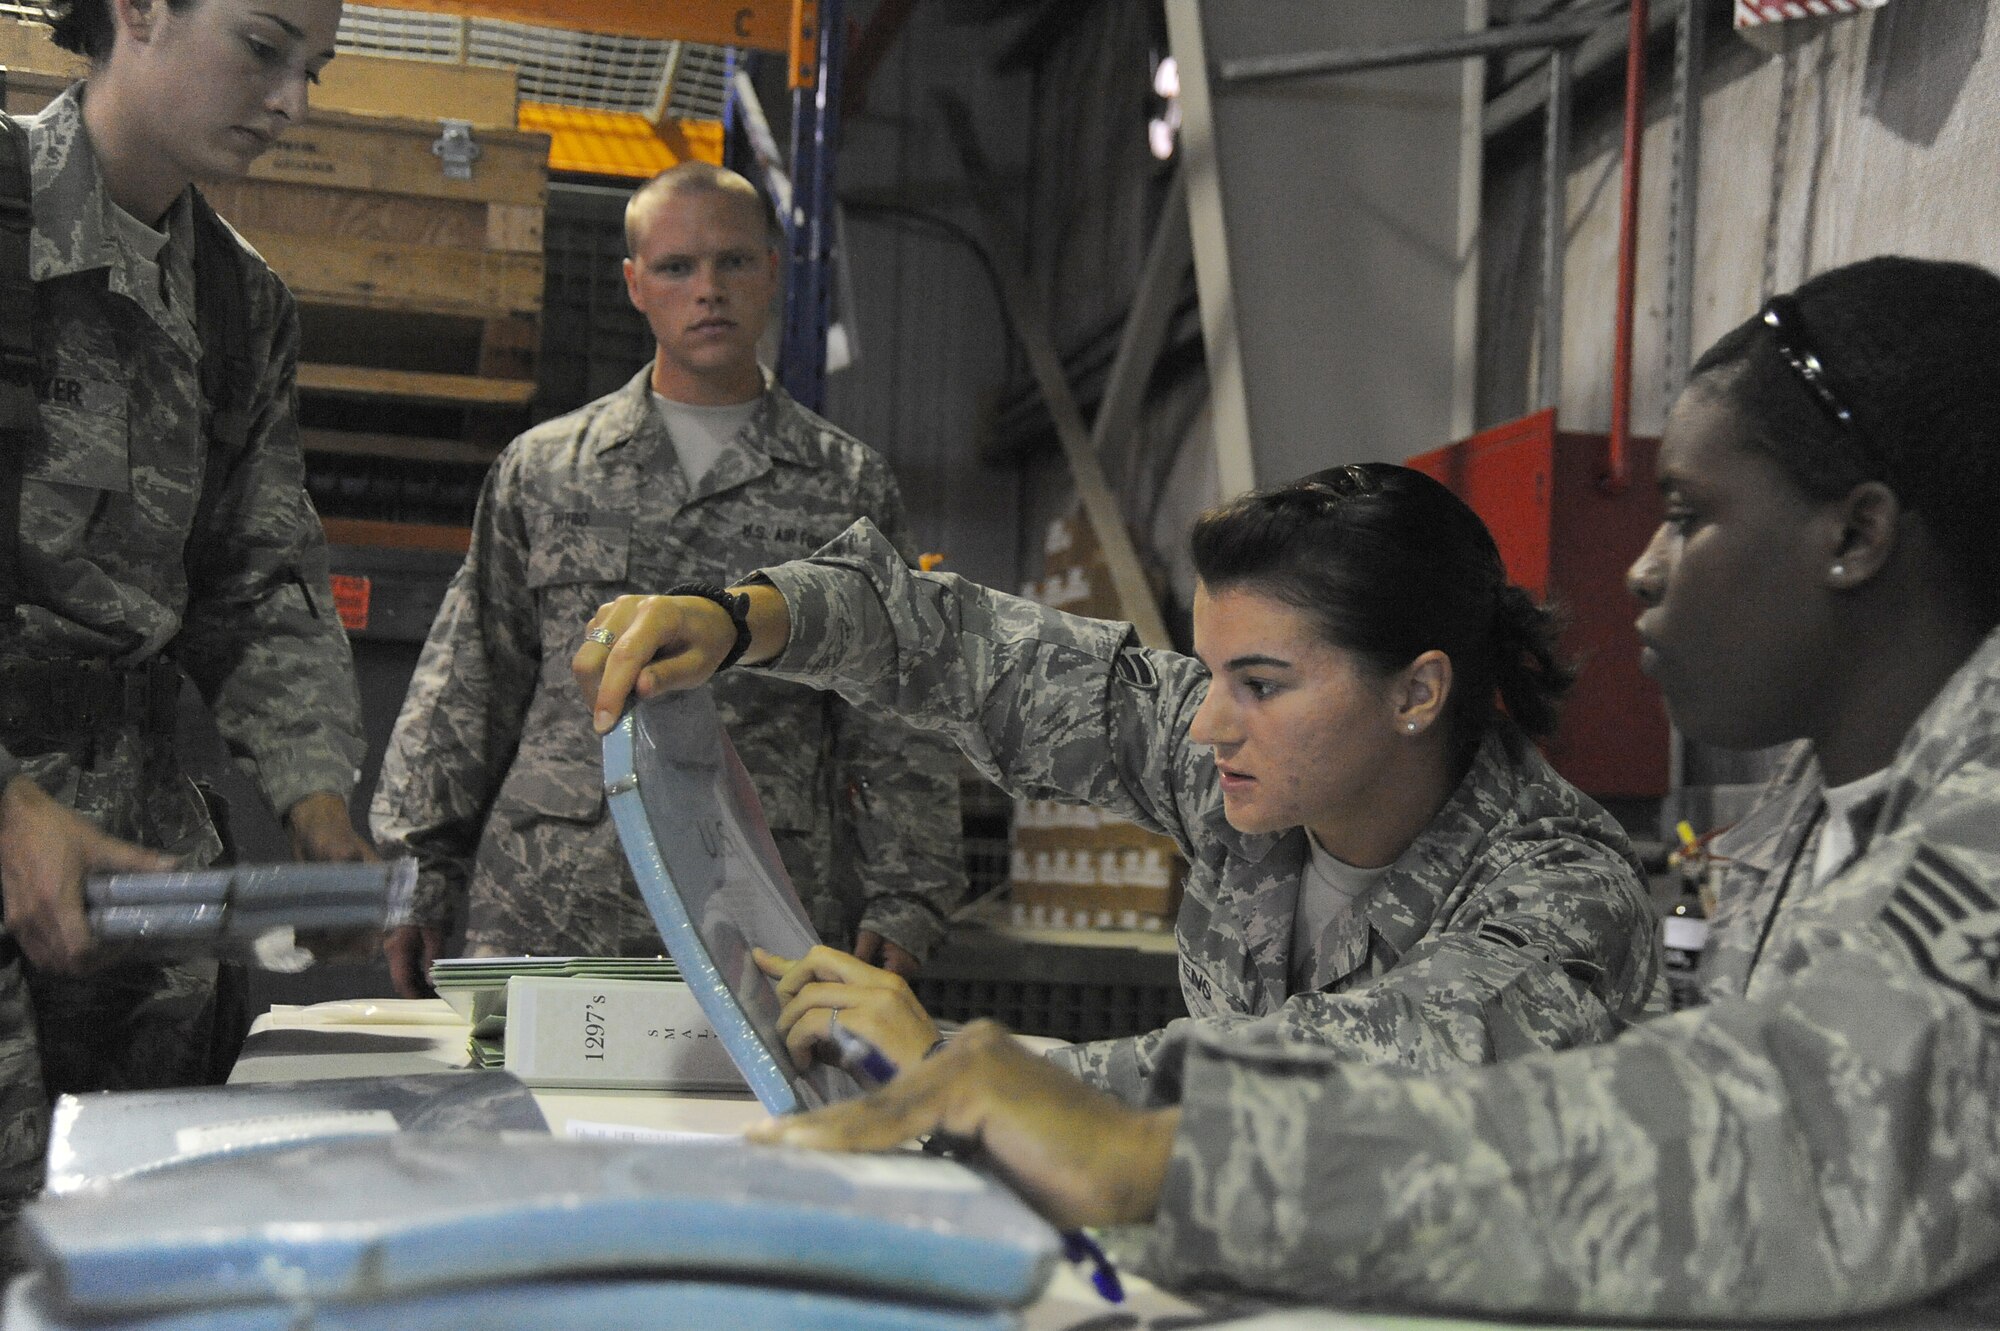 Staff Sgt. Deandrea Dorsey and Airman 1st Class Venus Owens, 380th Expeditionary Logistics Readiness Squadron, verify serial numbers on body armor plates against numbers on form 1297's for accountability during a readiness exercise, April 21 at undisclosed location in Southwest Asia. The 380th ELRS ran the exercise to test the timeliness and capability for redeployment of Airmen. Sergeant Dorsey is deployed from Hurlburt Field, Fla. and hails from West Memphis, Ark. Airman Owens is deployed from Eglin AFB, Fla. and is from Azle, Texas. (U.S. Air Force photo by Senior Airman Brian J. Ellis) (Released)